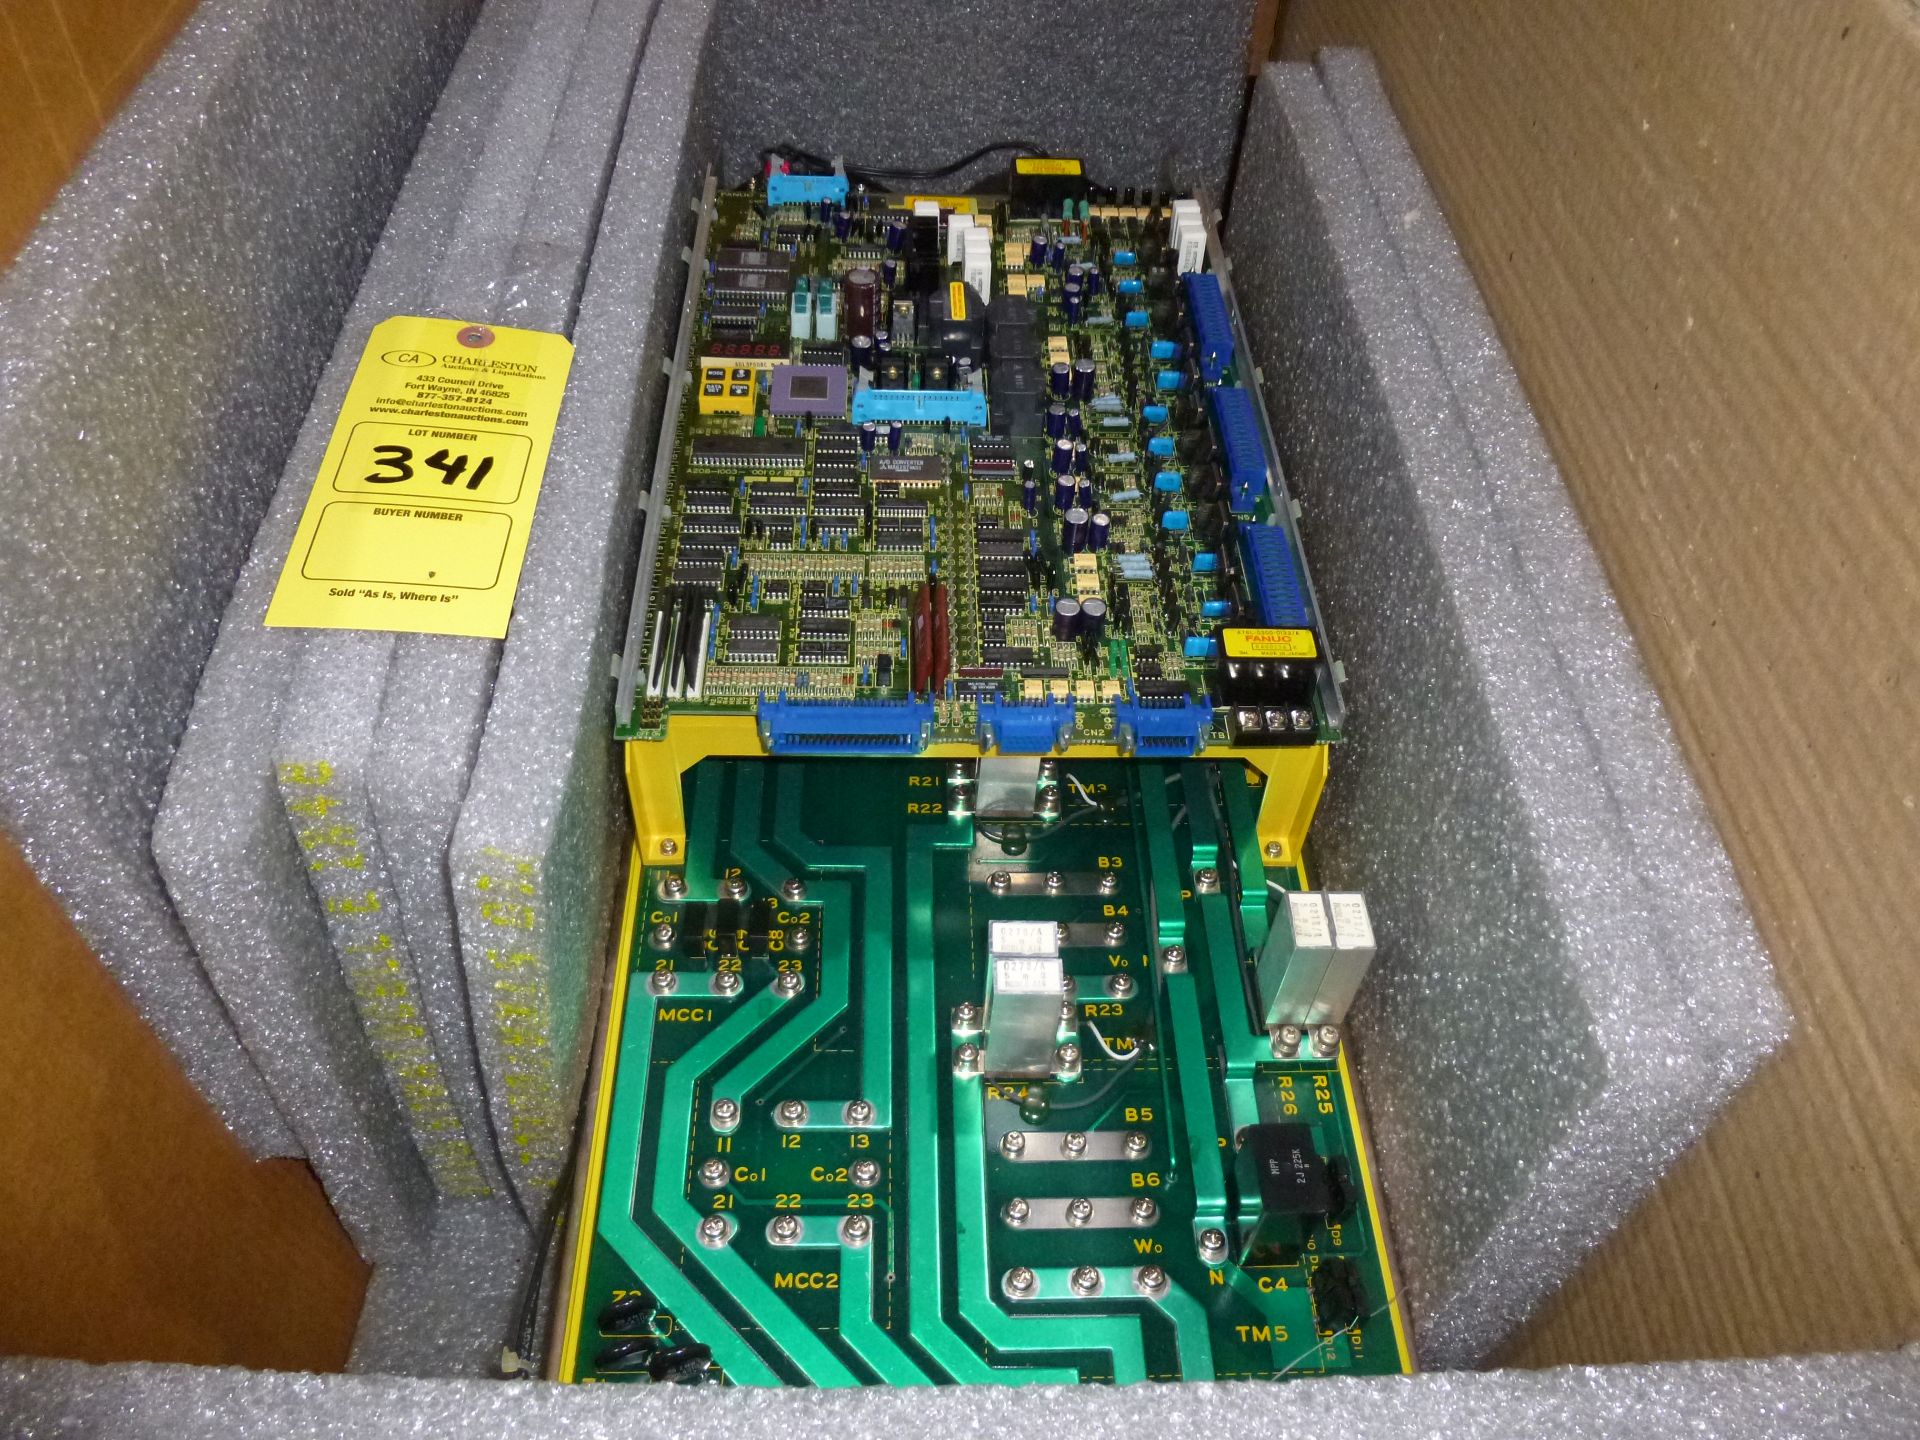 Fanuc AC spindle servo unit model A06B-6059-H218, appears new/unused in box, box shows wear, as - Image 2 of 4